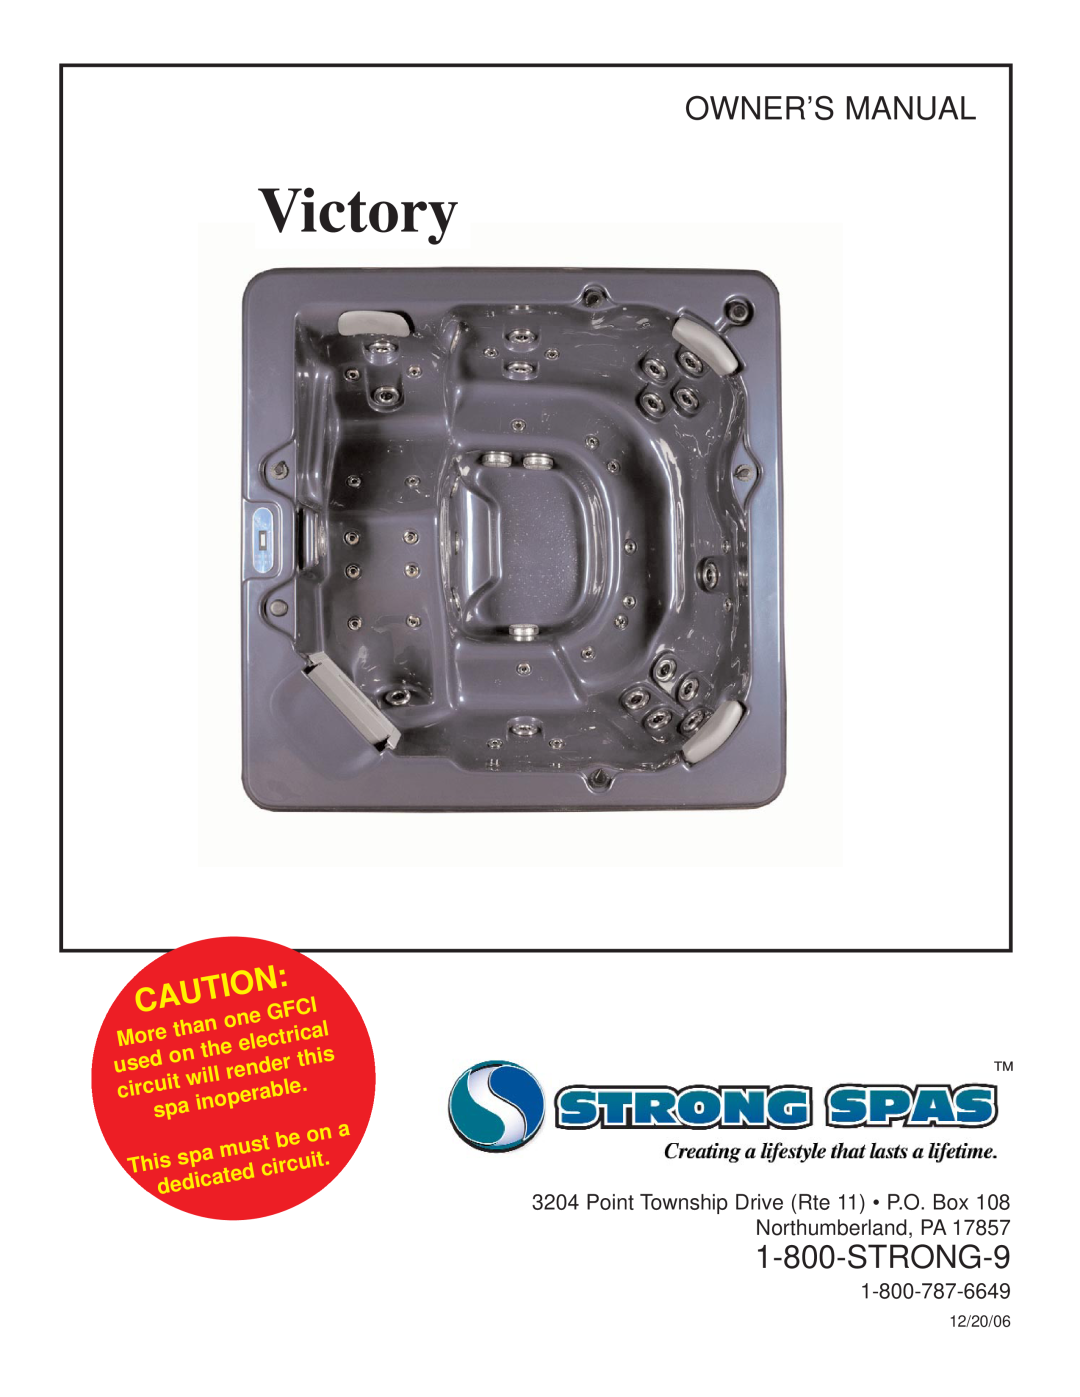 Strong Pools and Spas Victory Spa owner manual STRONG-9, than, Gfci, More, electrical, used, this, render, will, circuit 